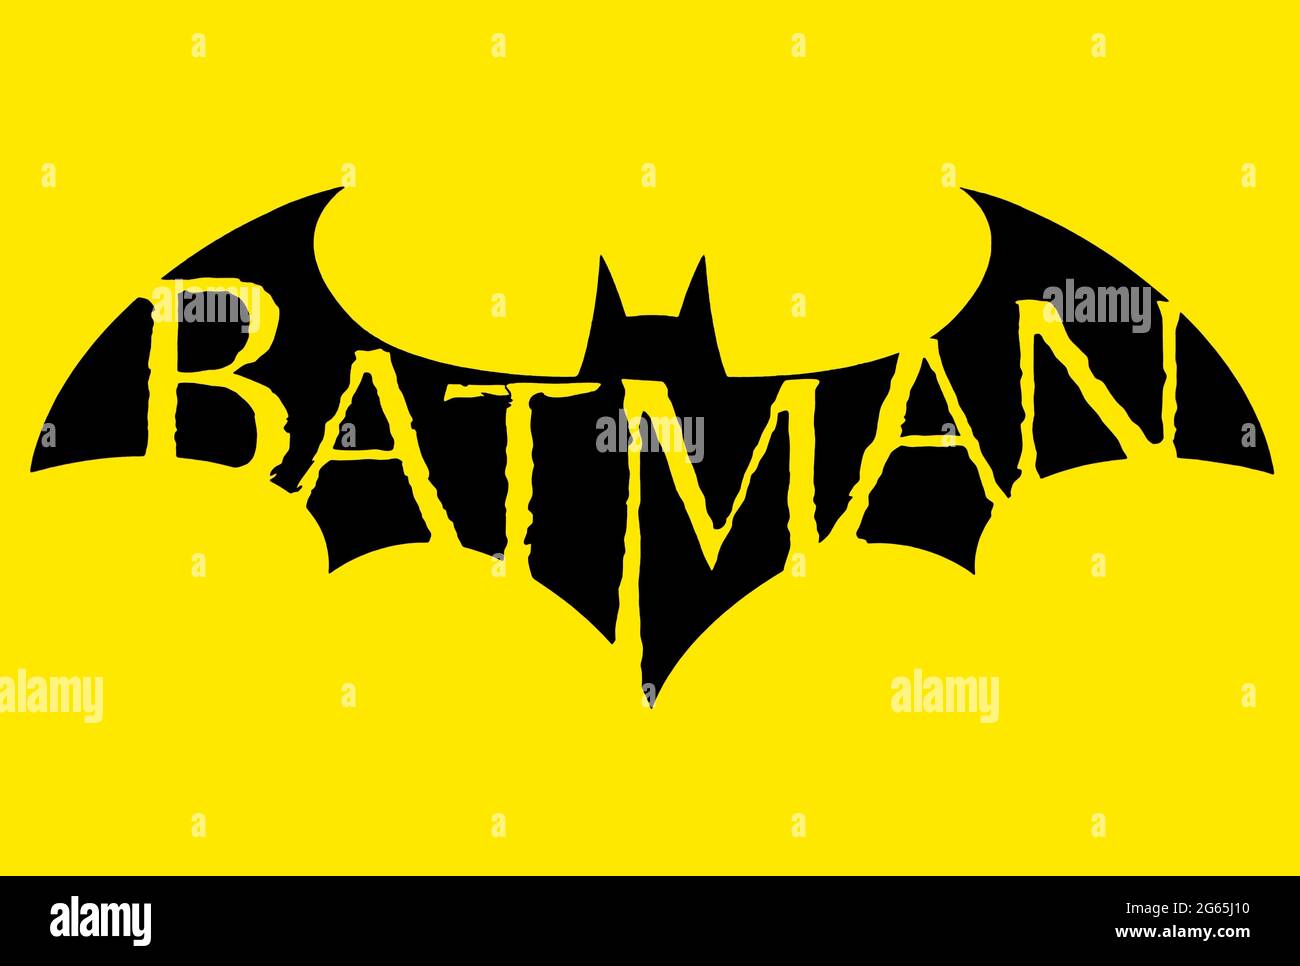 Bologna / Italy - June 30, 2021: The famous Batman logo, isolated on yellow background, to celebrate the Batman's 82th birthday. Stock Photo